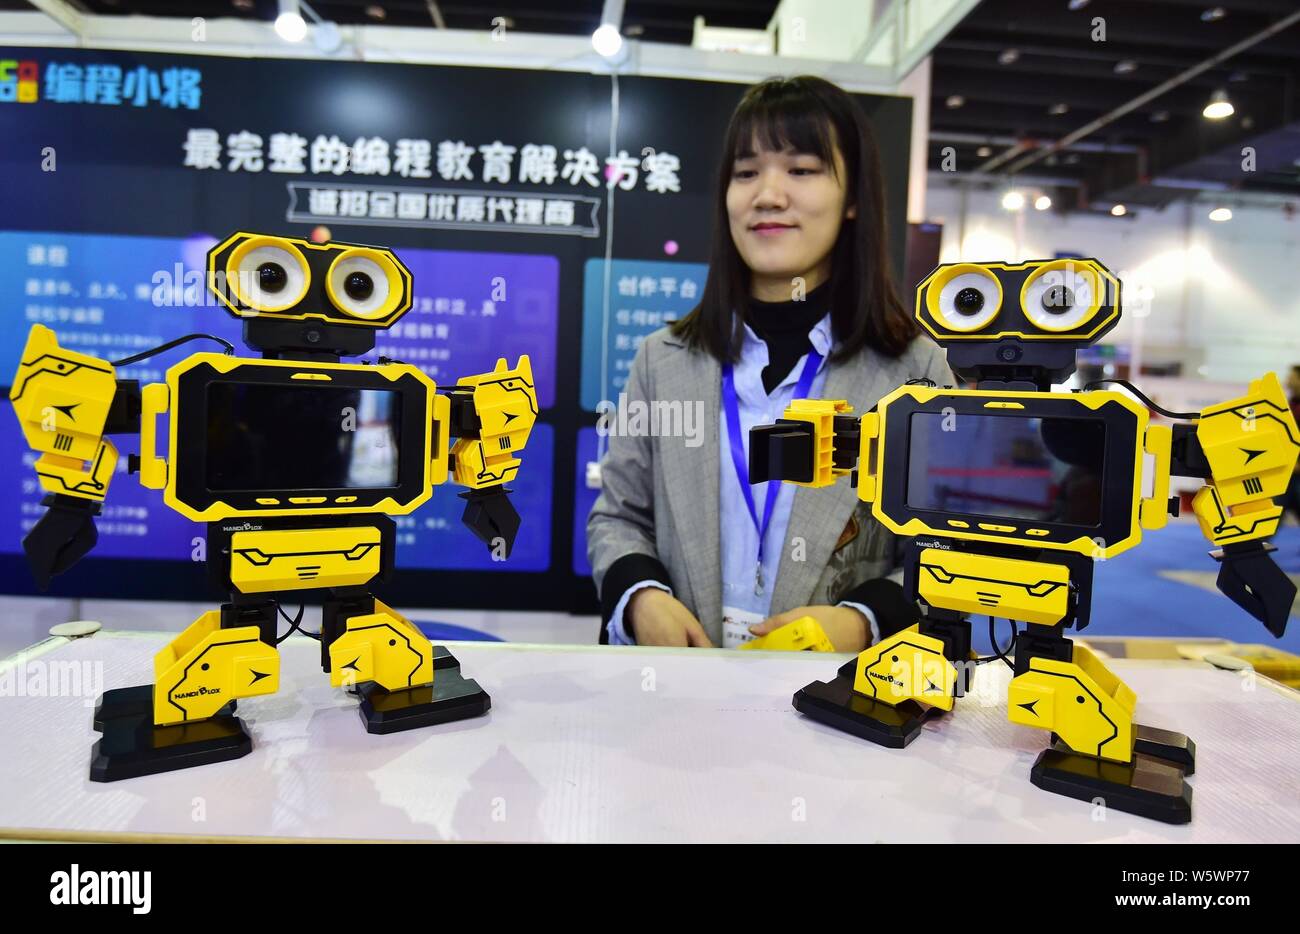 Educational companion robots 'Xiaowu' are on display during the 5th China Yiwu International Manufacturing Equipment Expo in Yiwu city, Jinhua city, e Stock Photo